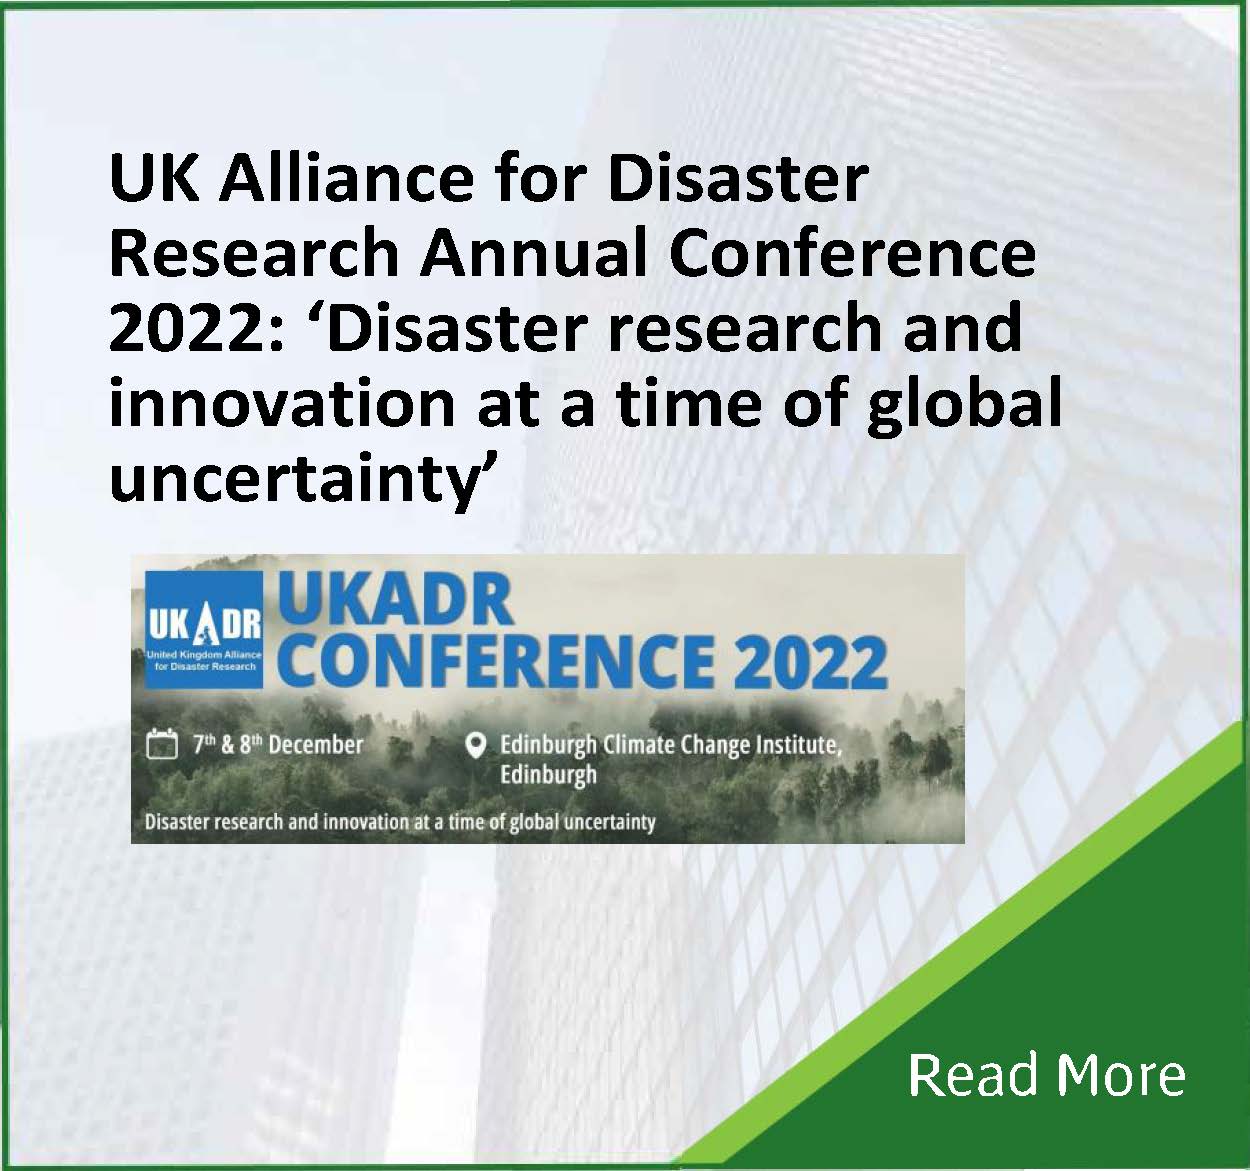 UK Alliance for Disaster Research Annual Conference 2022: ‘Disaster research and innovation at a time of global uncertainty’